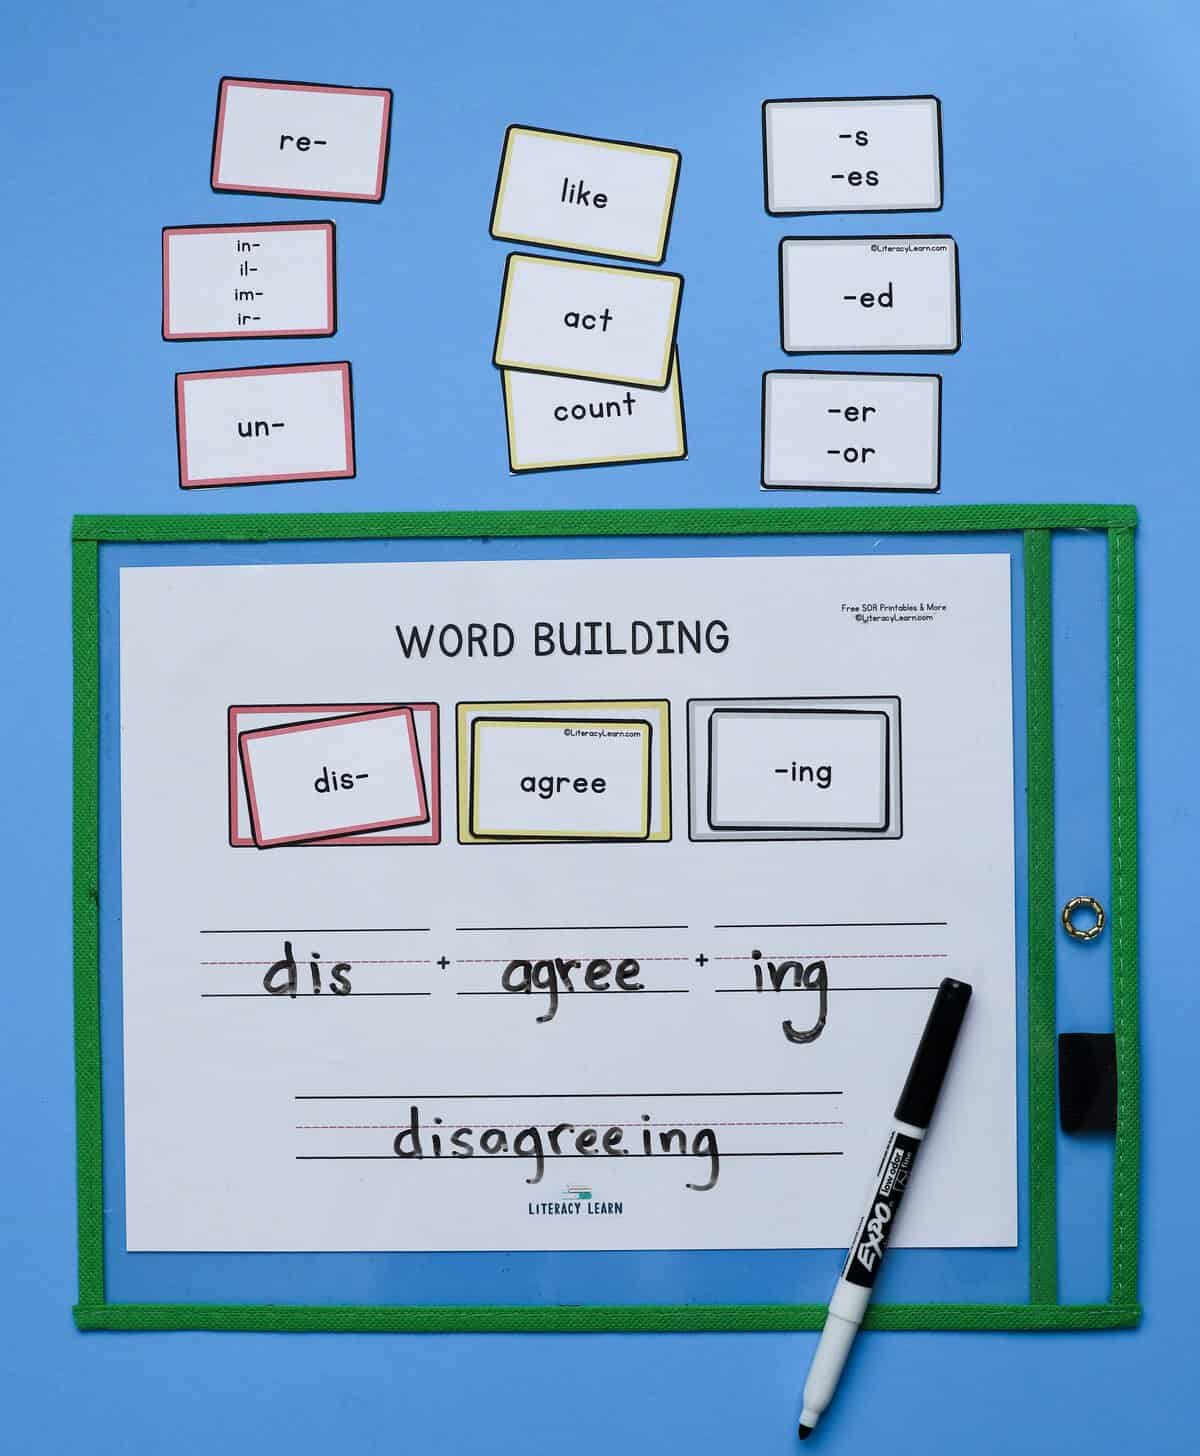 Photograph of a printed word building mat with prefix, suffix, and base cards.